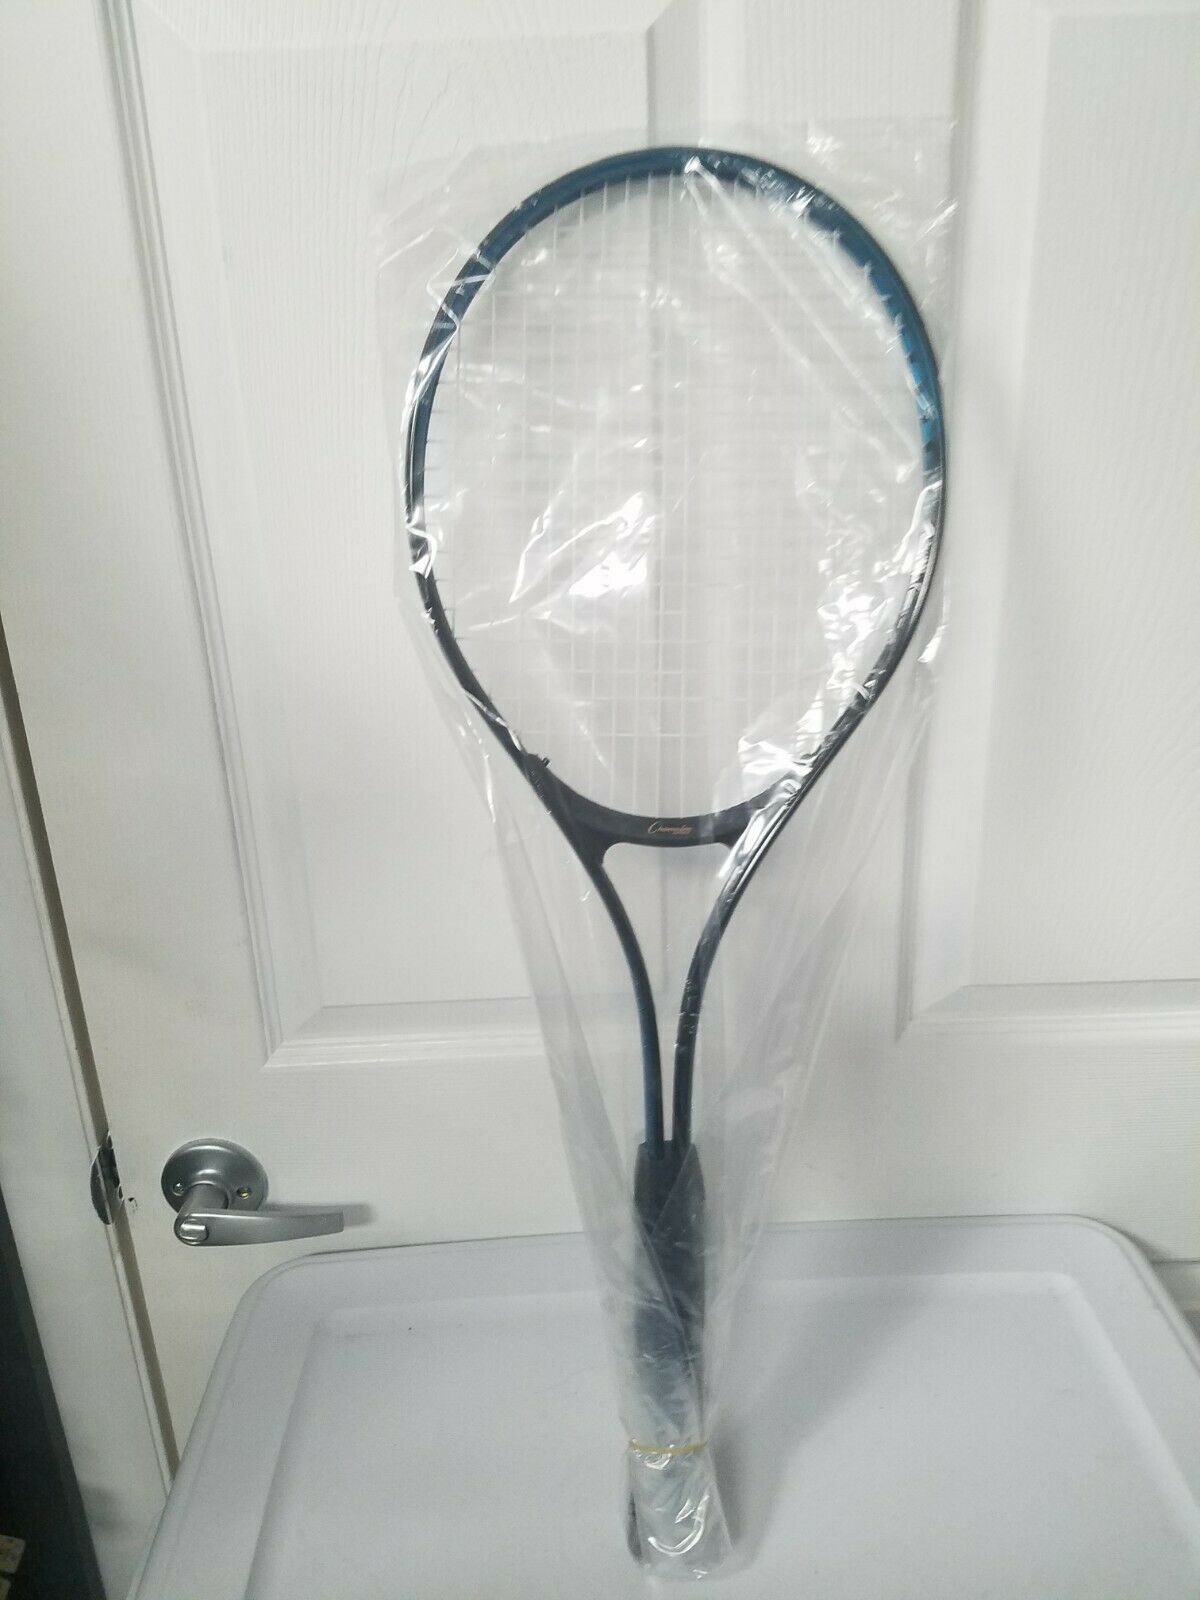 Champion Sports New Aluminum Tennis Racket Size 4 3/8 In Clearance